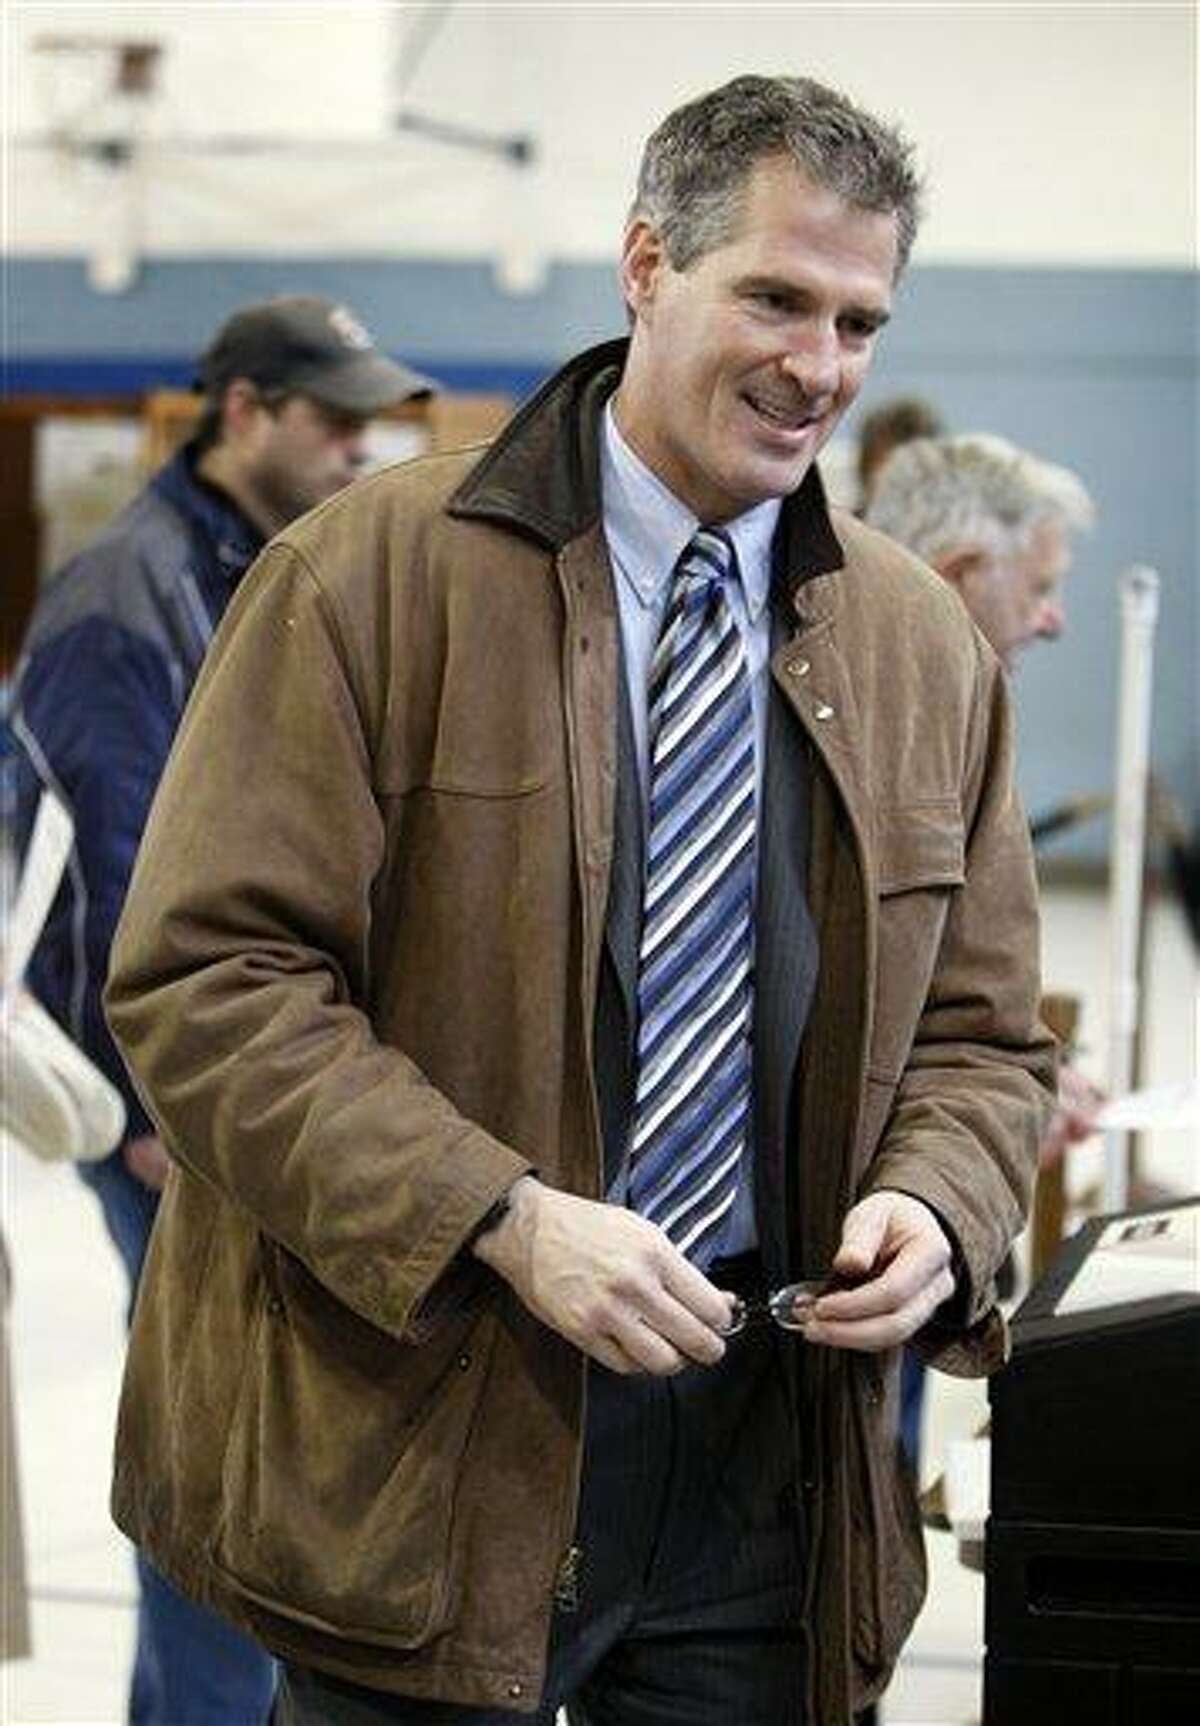 Massachusetts State Senator Scott Brown, R-Wrentham, votes in Wrentham, Mass., Tuesday, Jan. 19, 2010. Brown is running against Democrat Martha Coakley in a special election to fill the U.S. Senate seat left empty by the death of Sen. Edward M. Kennedy, D-Mass. (AP Photo/Robert F. Bukaty)